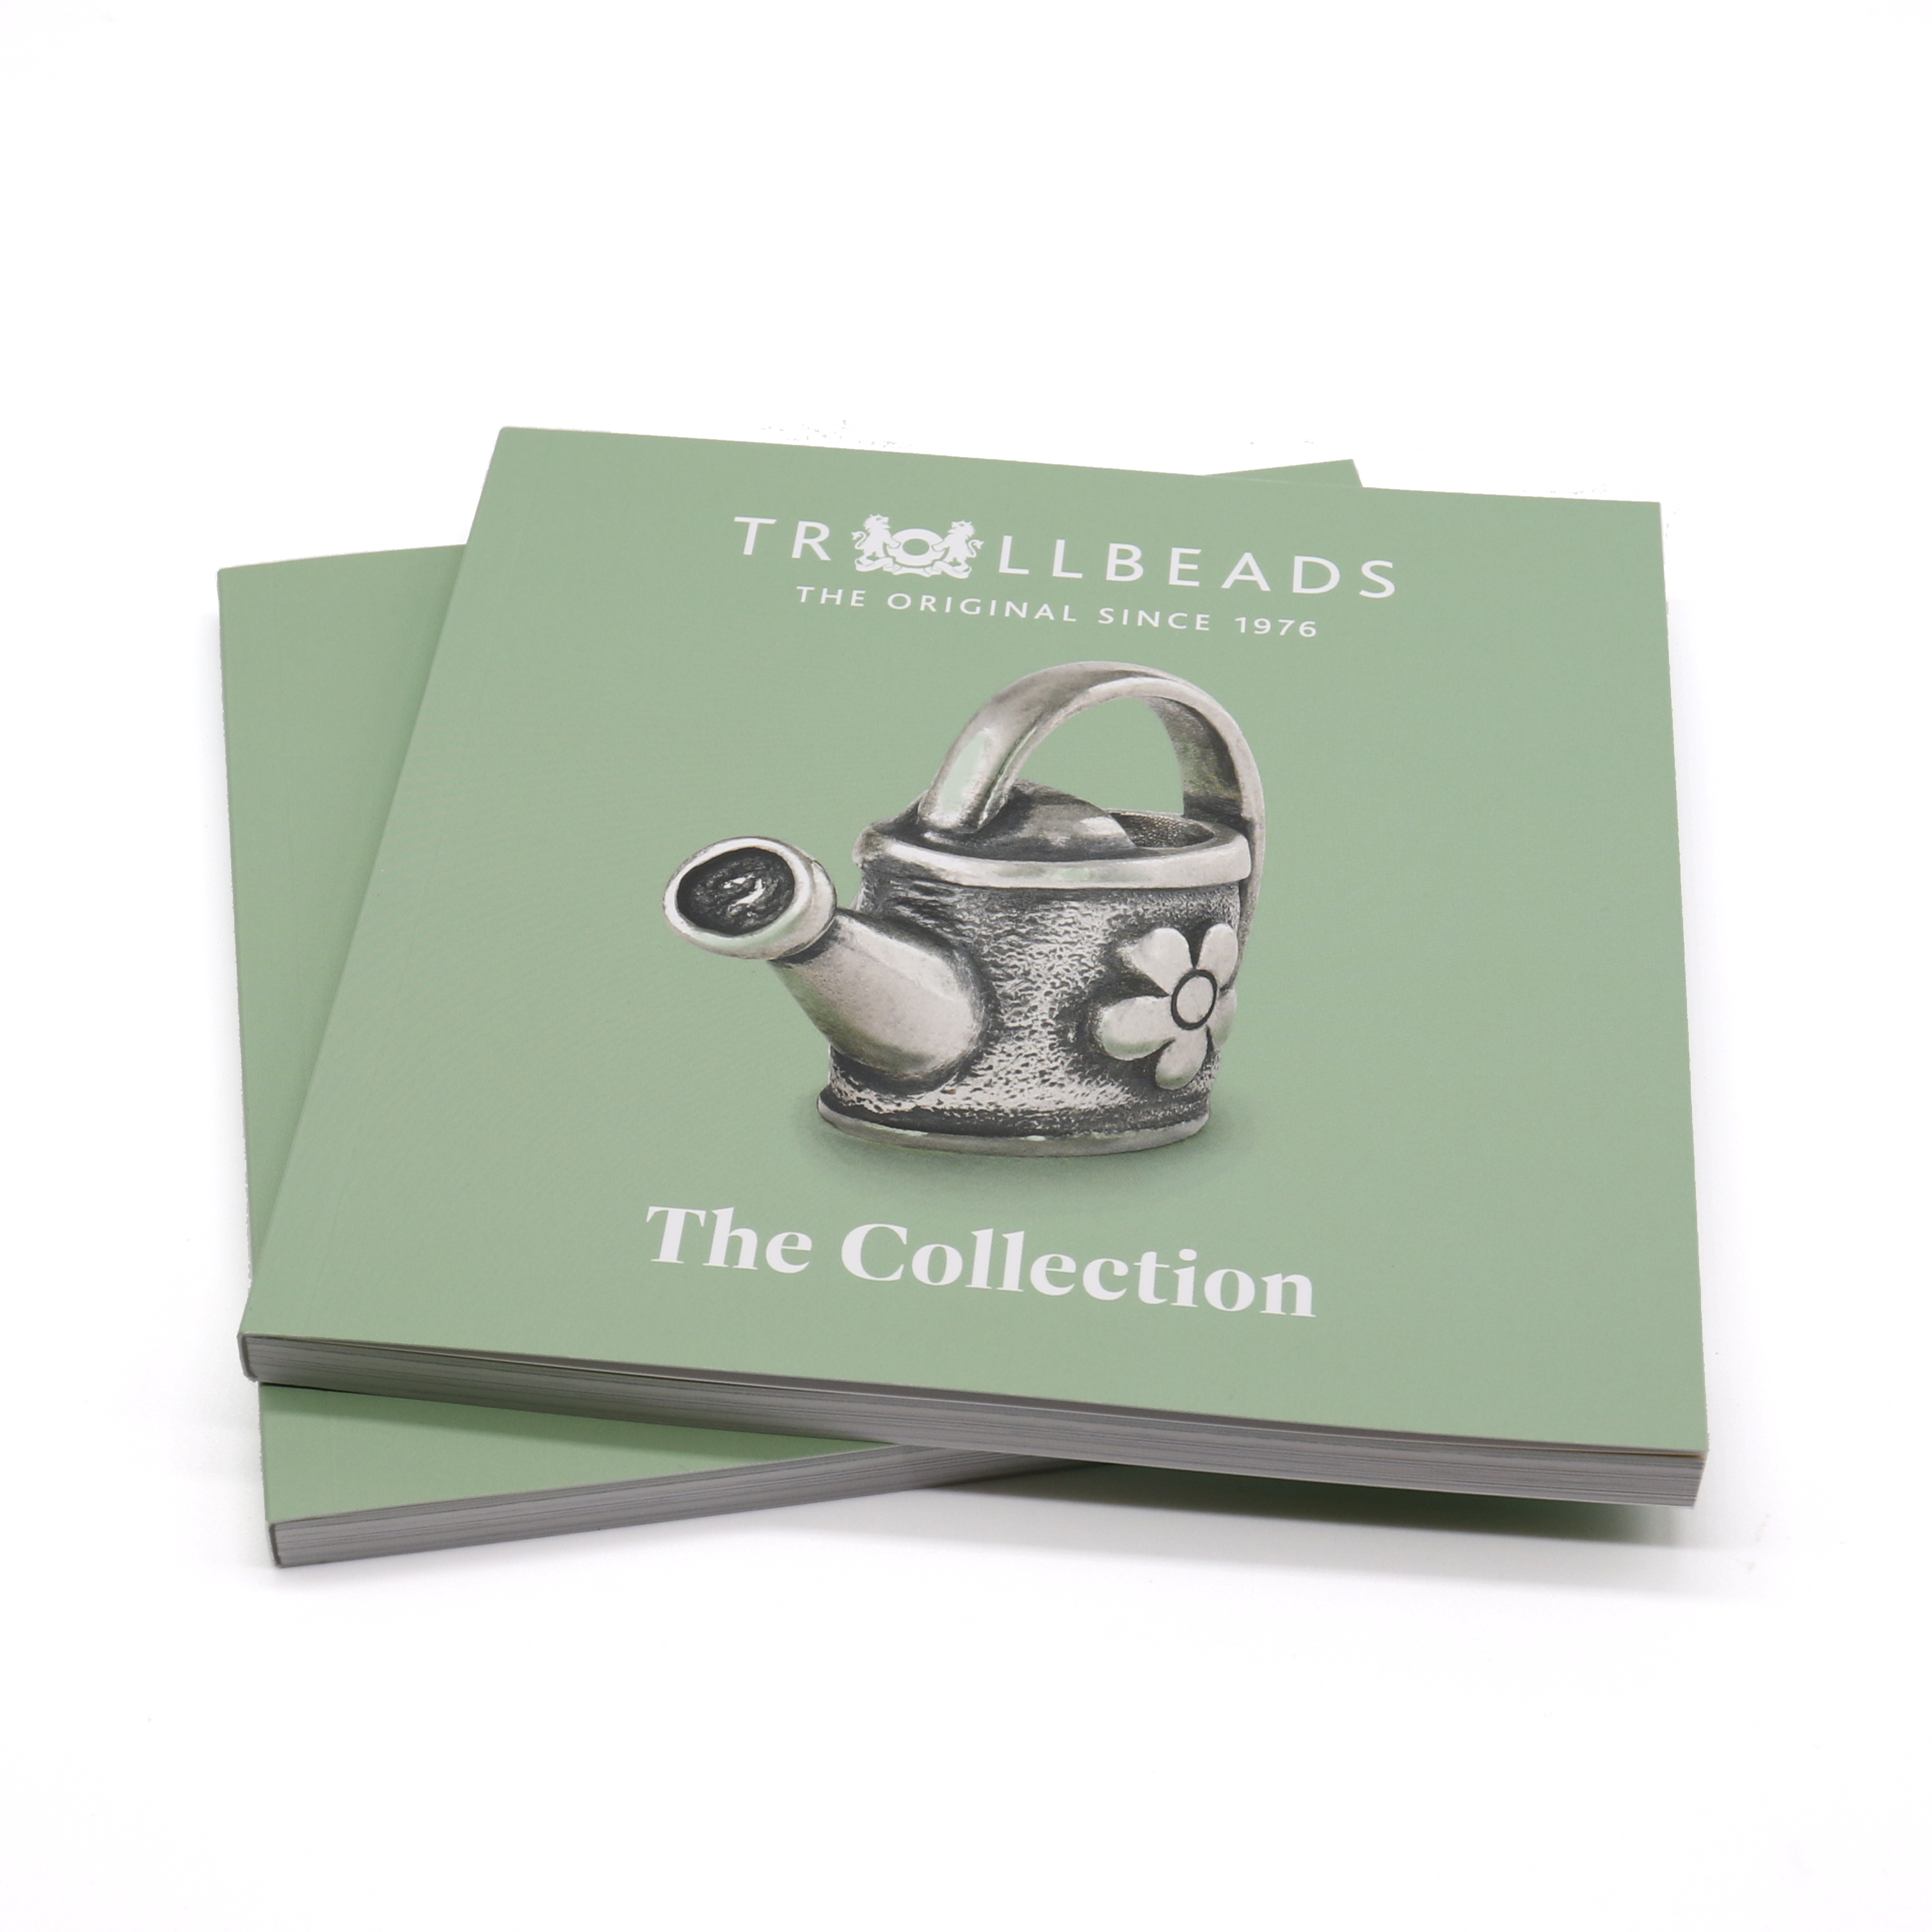 Full Collection Brochure - 1 per order